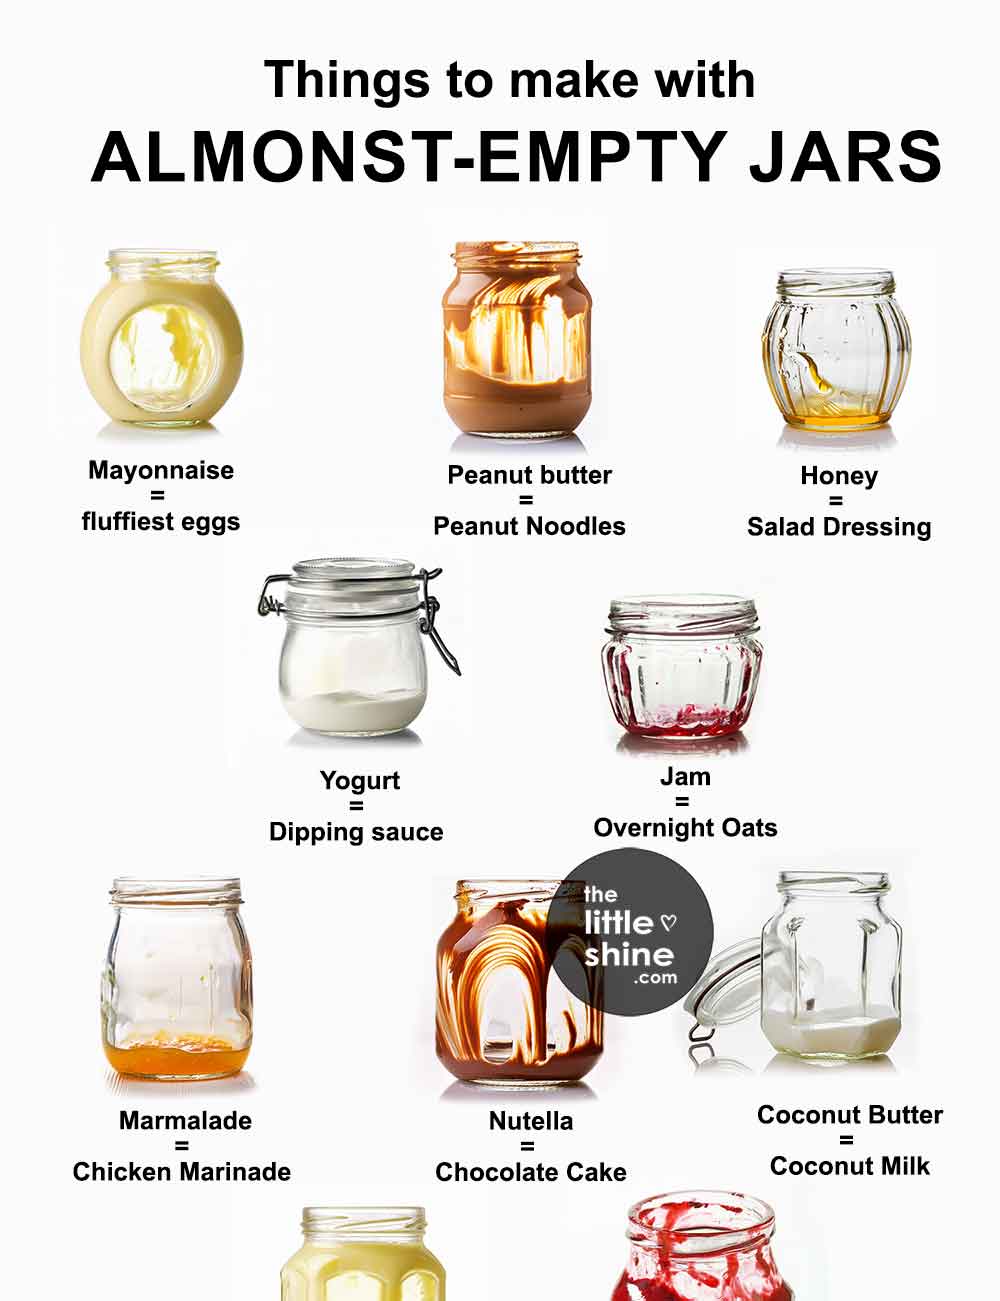 Jar Hacks - Delicious Recipes You Can Make In an Almost-Empty Jar